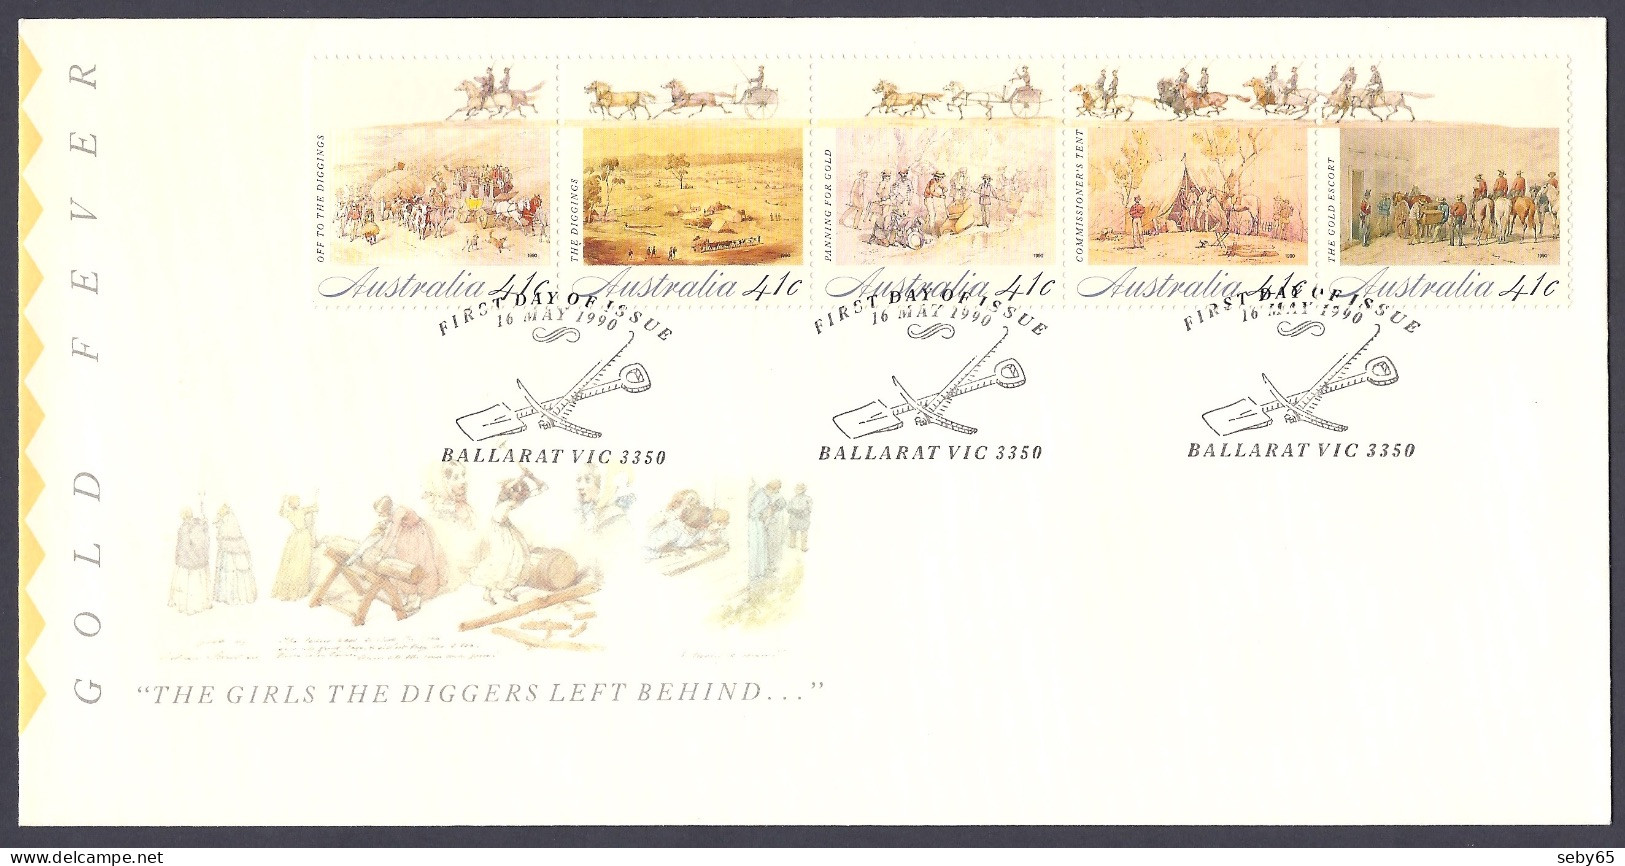 Australia 1990 - Gold Fever, Mining, Horses, Panning For Gold - FDC - Premiers Jours (FDC)